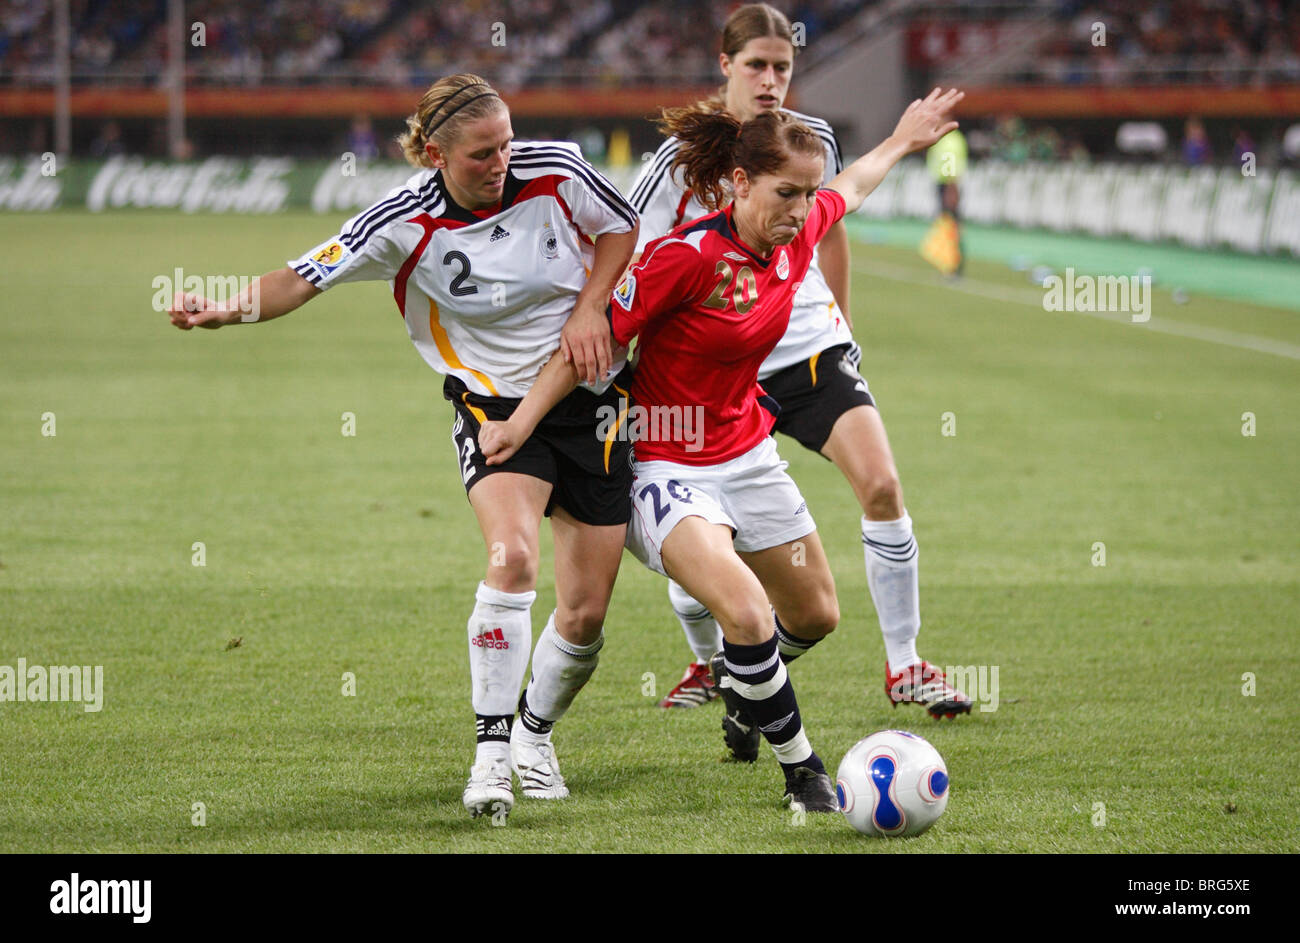 Kerstin Stegemann of Germany (2) defends against Lise Klaveness of Norway (20) during a 2007 Women's World Cup semifinal match. Stock Photo